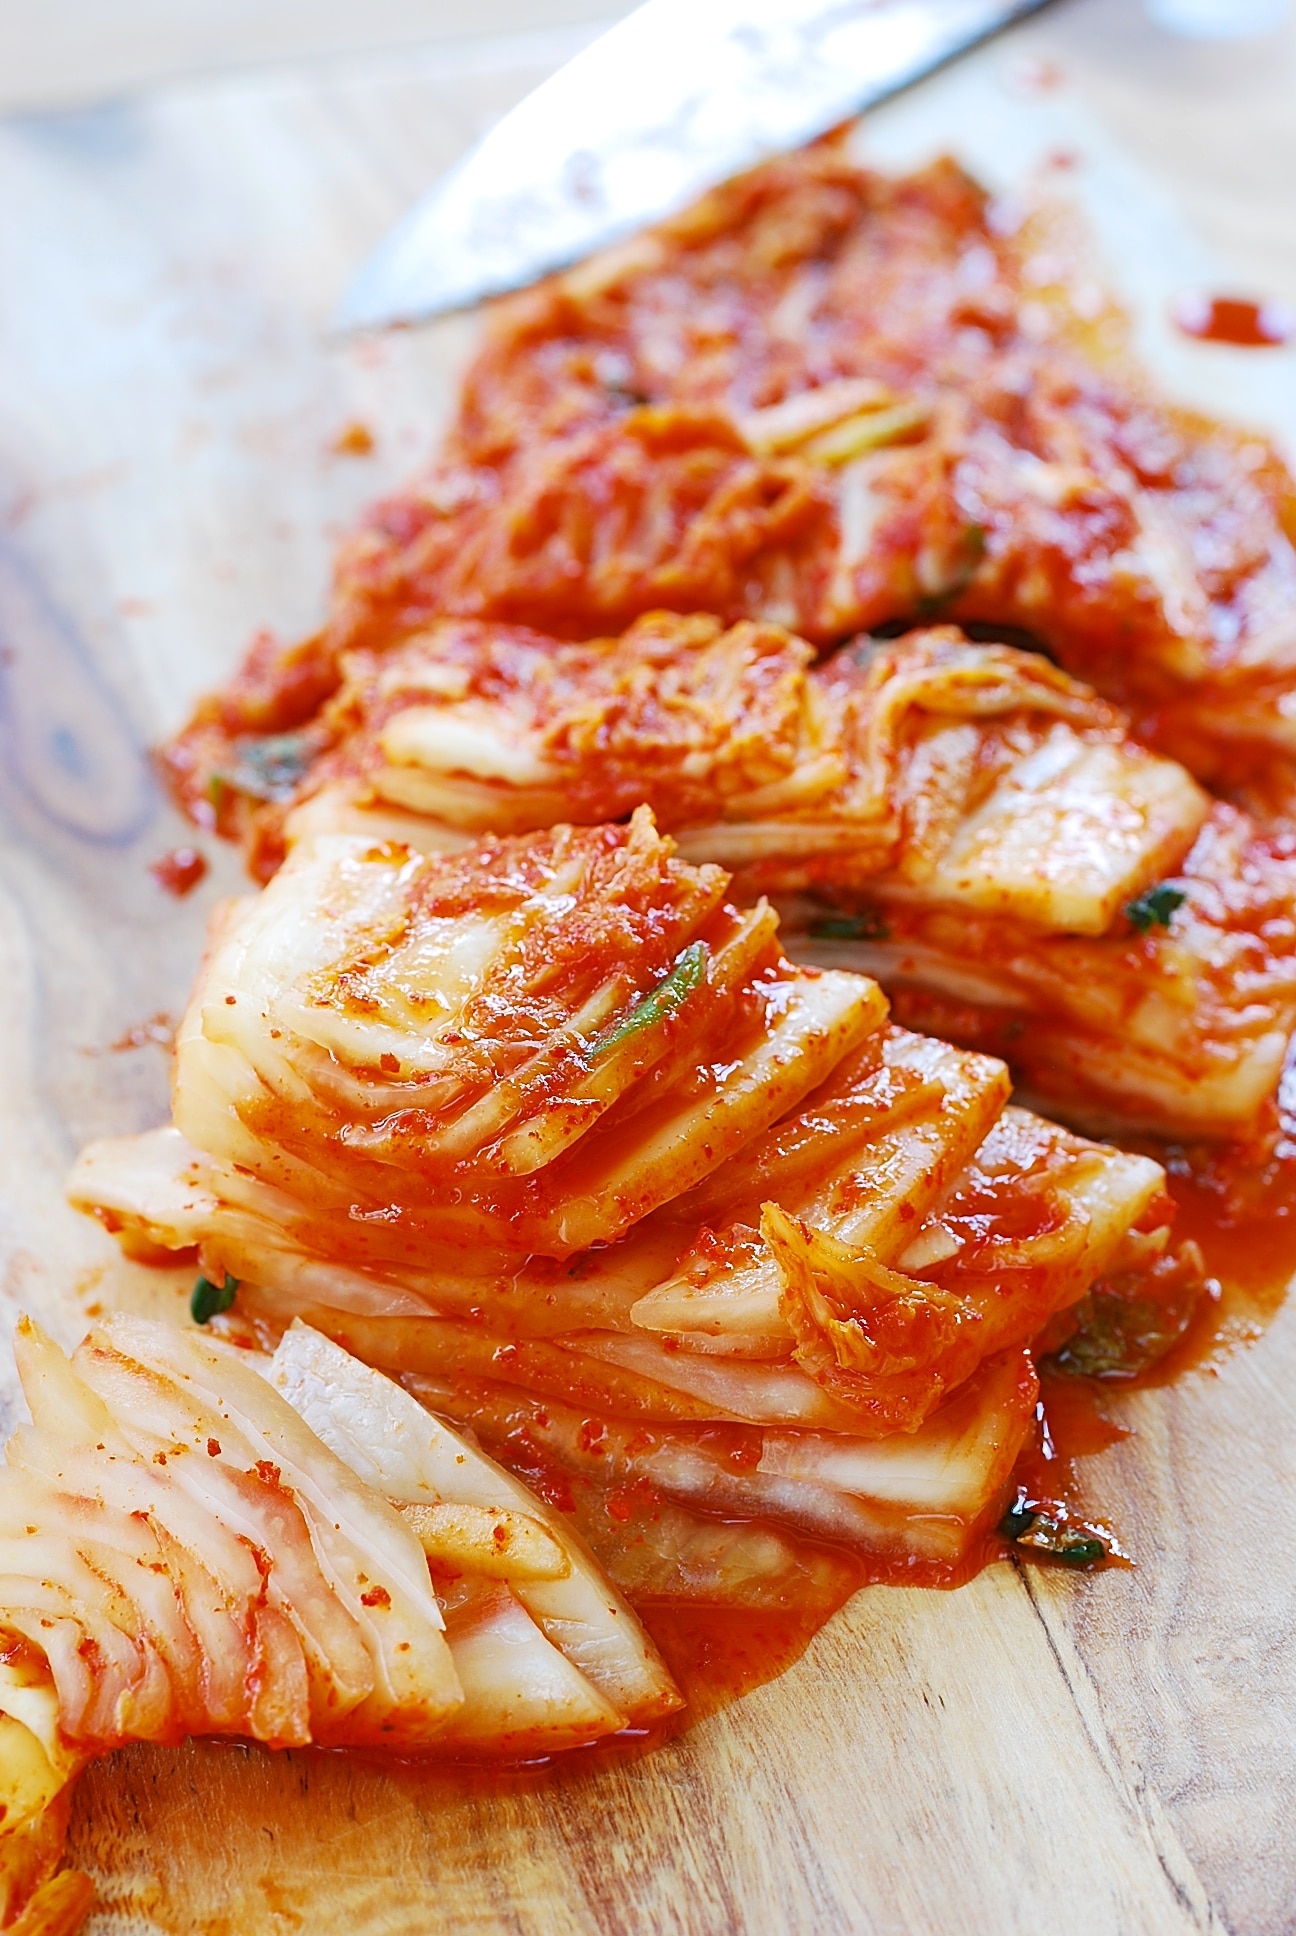 Traditional Kimchi Recipe Napa Cabbage Kimchi Korean Bapsang,Whats The Best Gin In The World